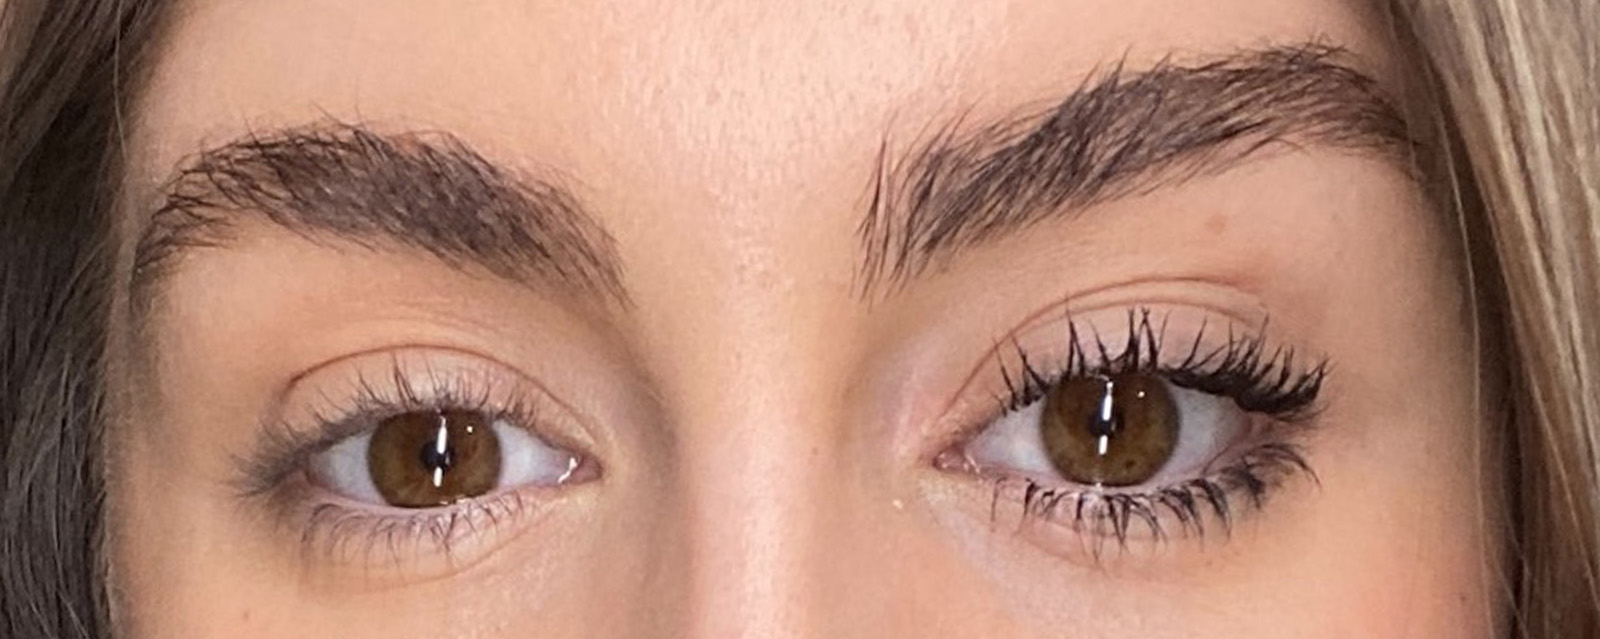 Tried The New MACStack Mascara - Here Are Reviews - Beauty Bay